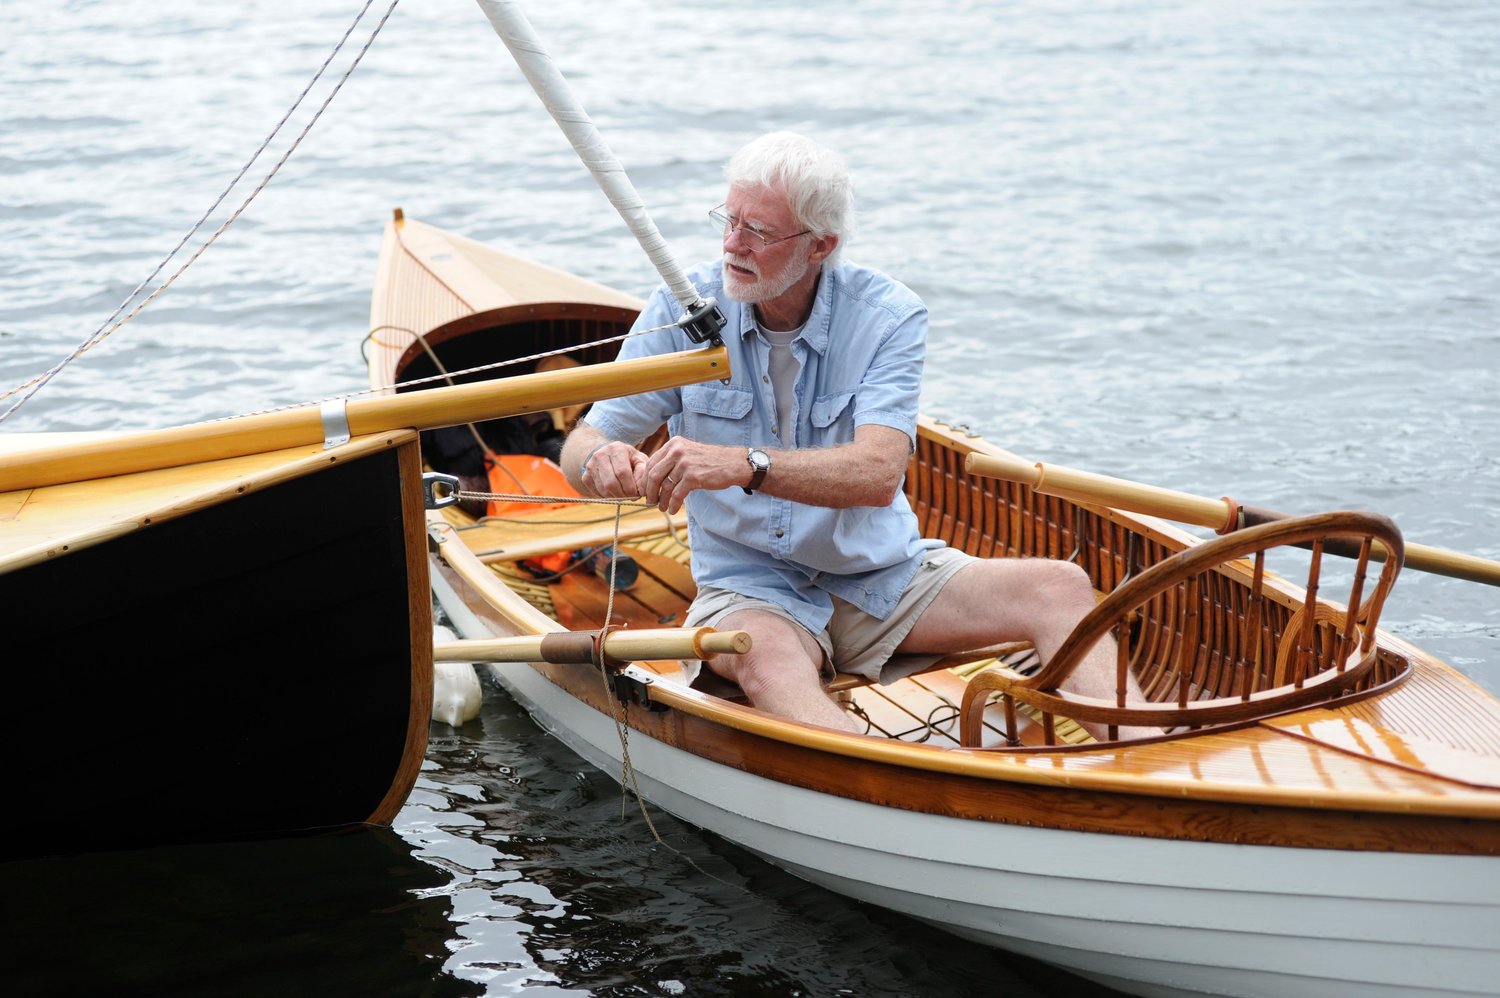 Making fast. Bruce Bidwell, a noted builder and restorer of wooden watercraft, ties up alongside Morse’s Narwhal. He is pictured in his meticulously restored 1900 Rushton pulling boat...